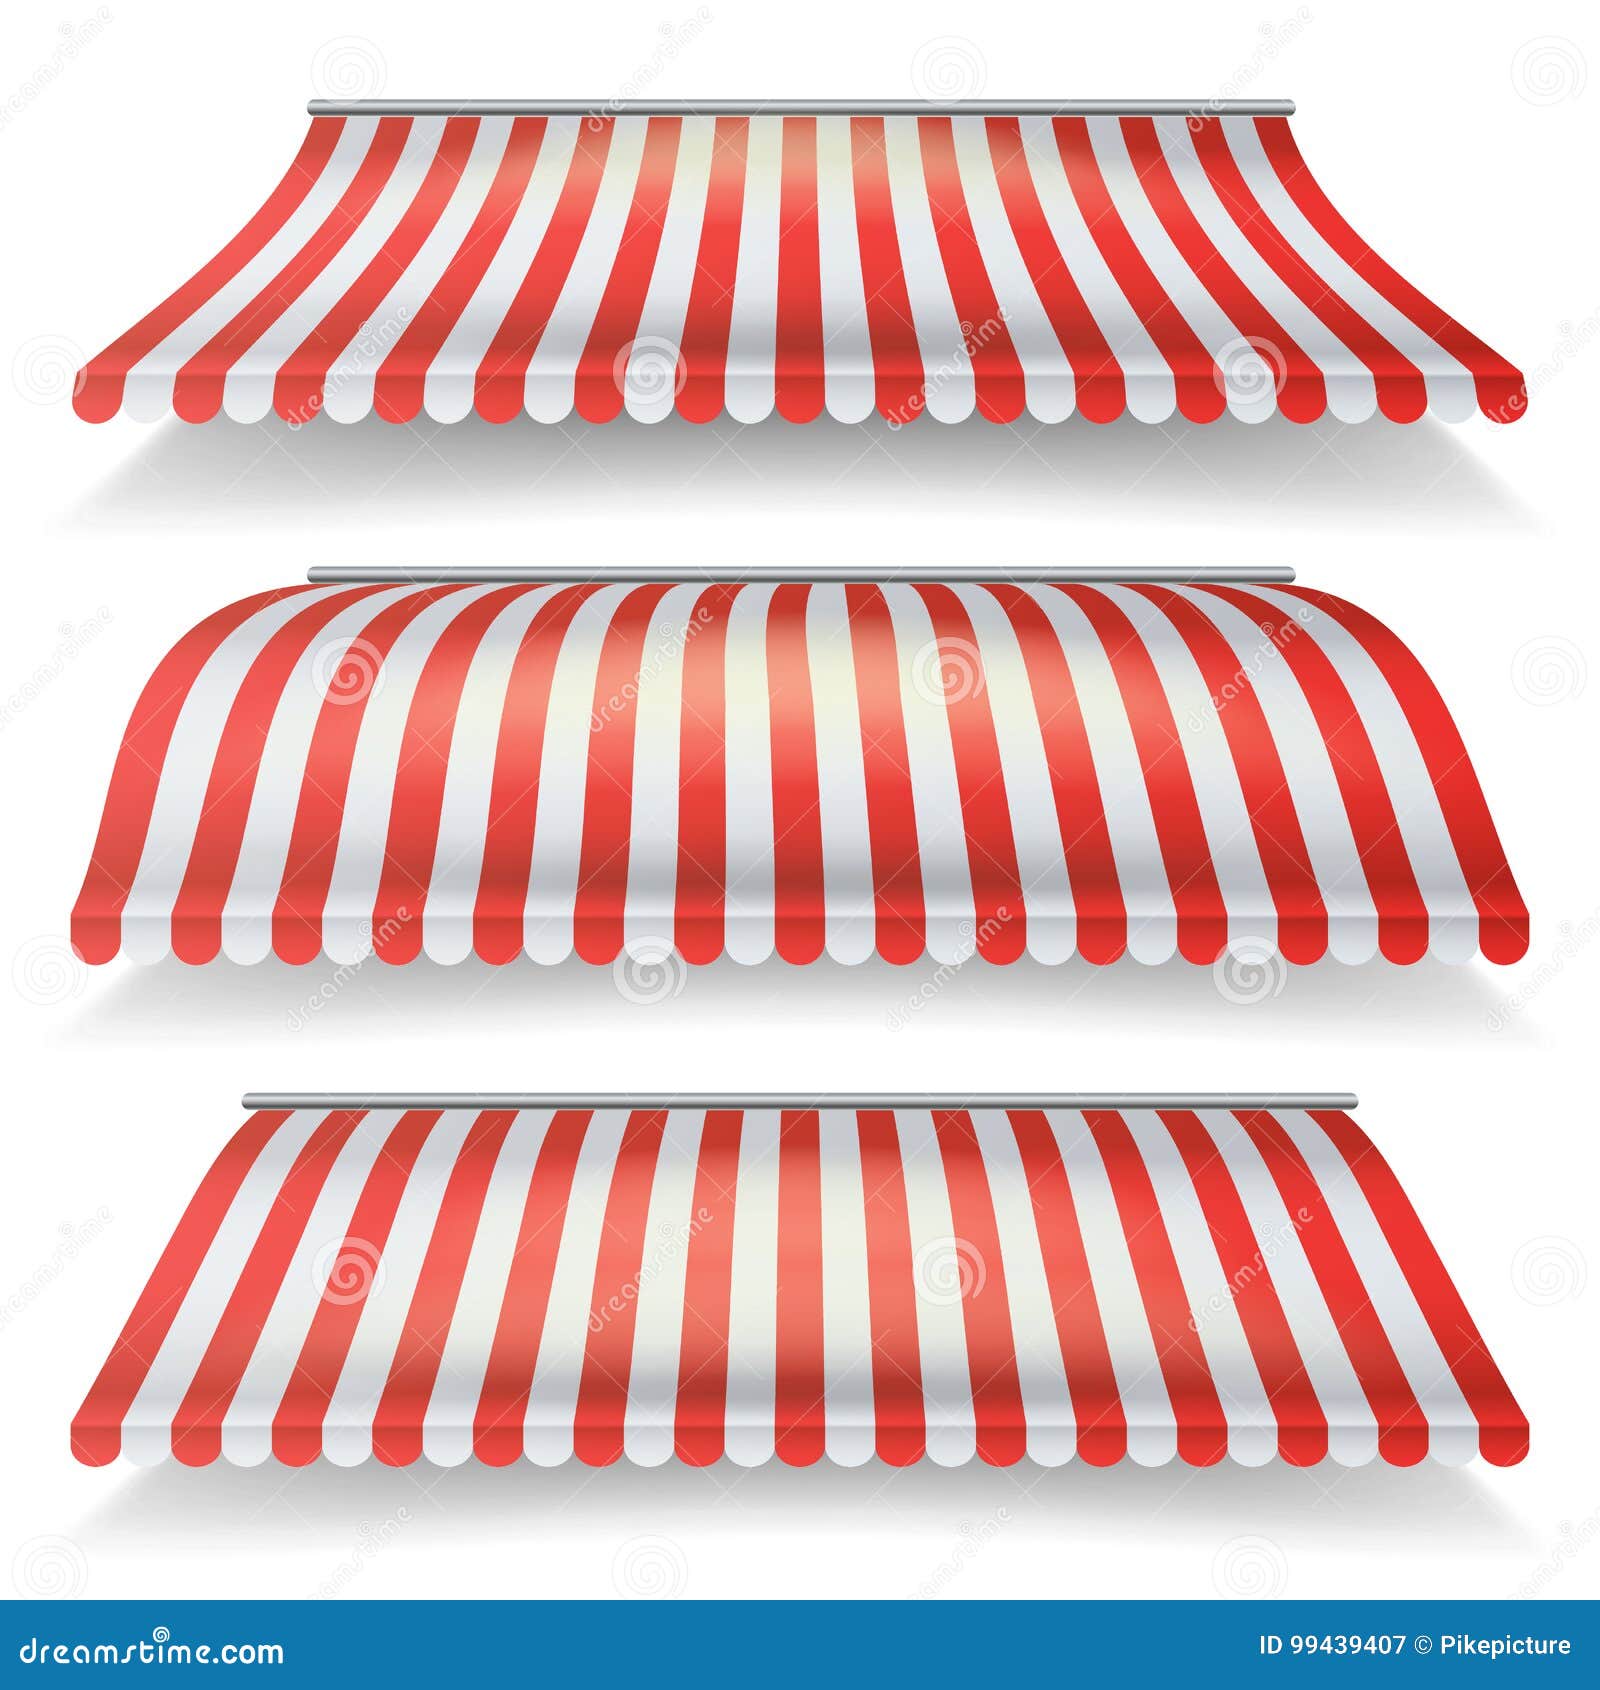 classic red and white awning  set. realistic store awning  on white background 